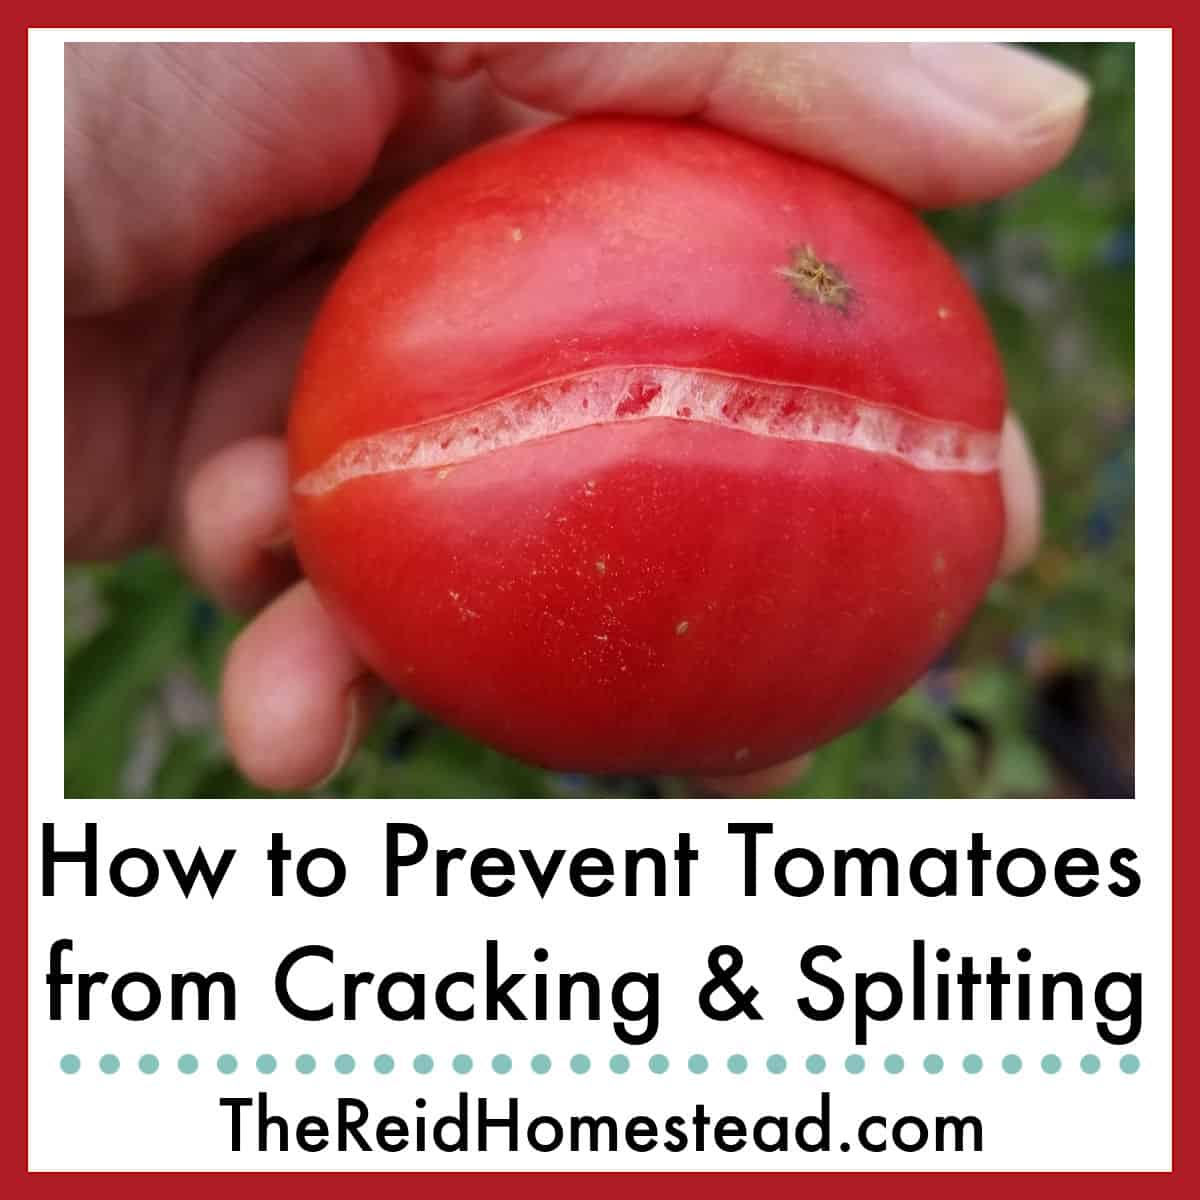 a cracked red tomato with text overlay How to Prevent Tomatoes from Cracking & Splitting